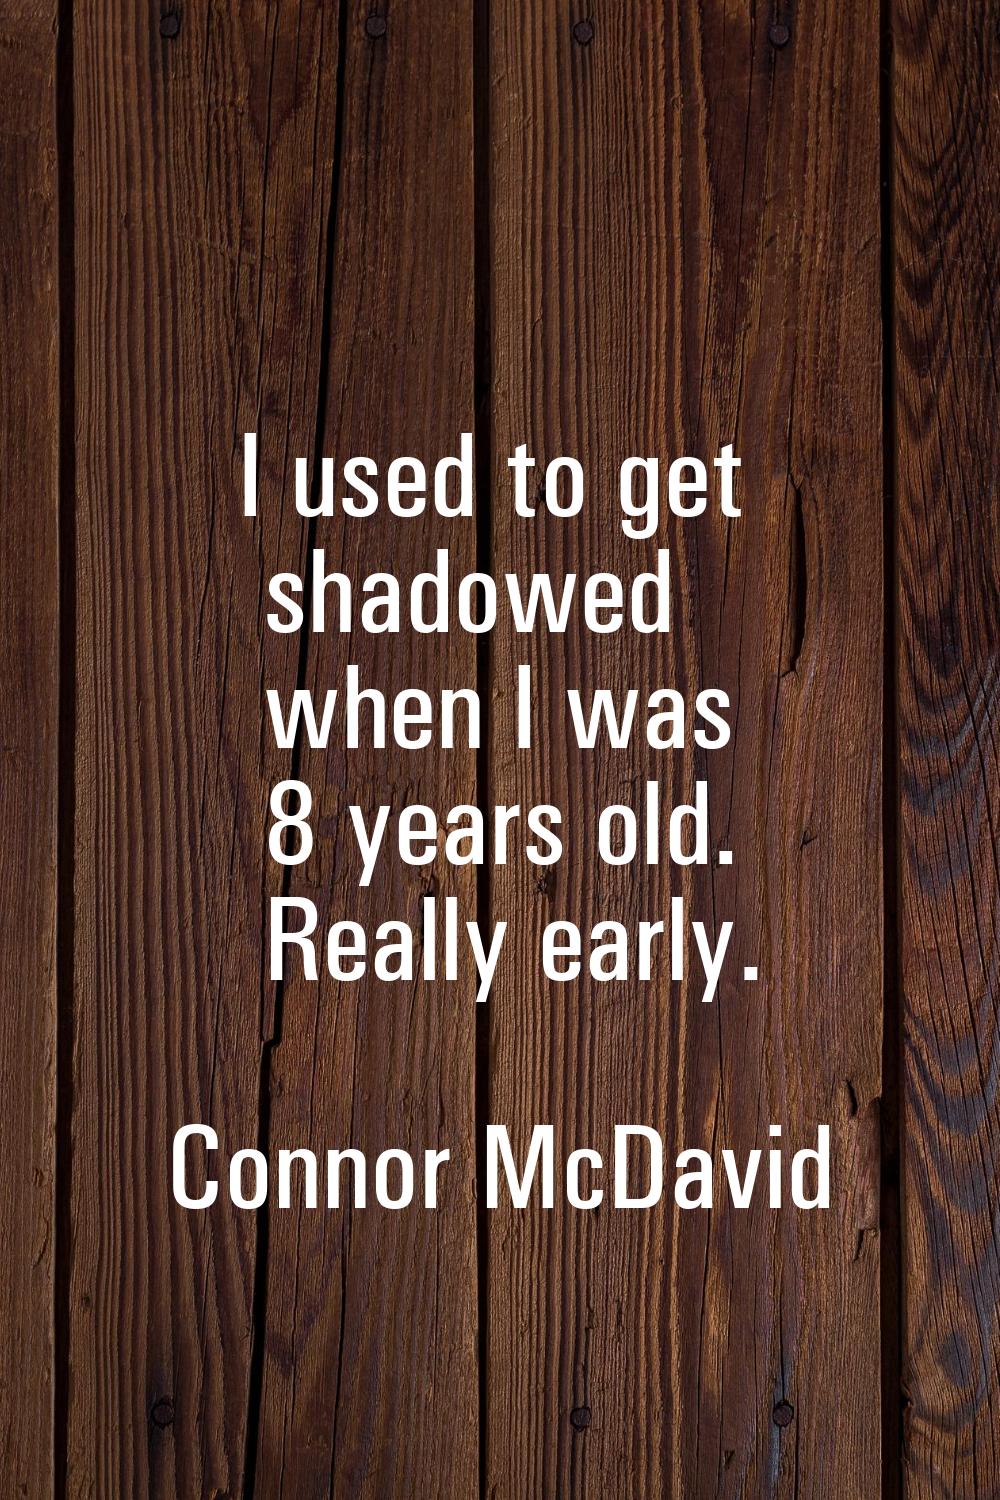 I used to get shadowed when I was 8 years old. Really early.